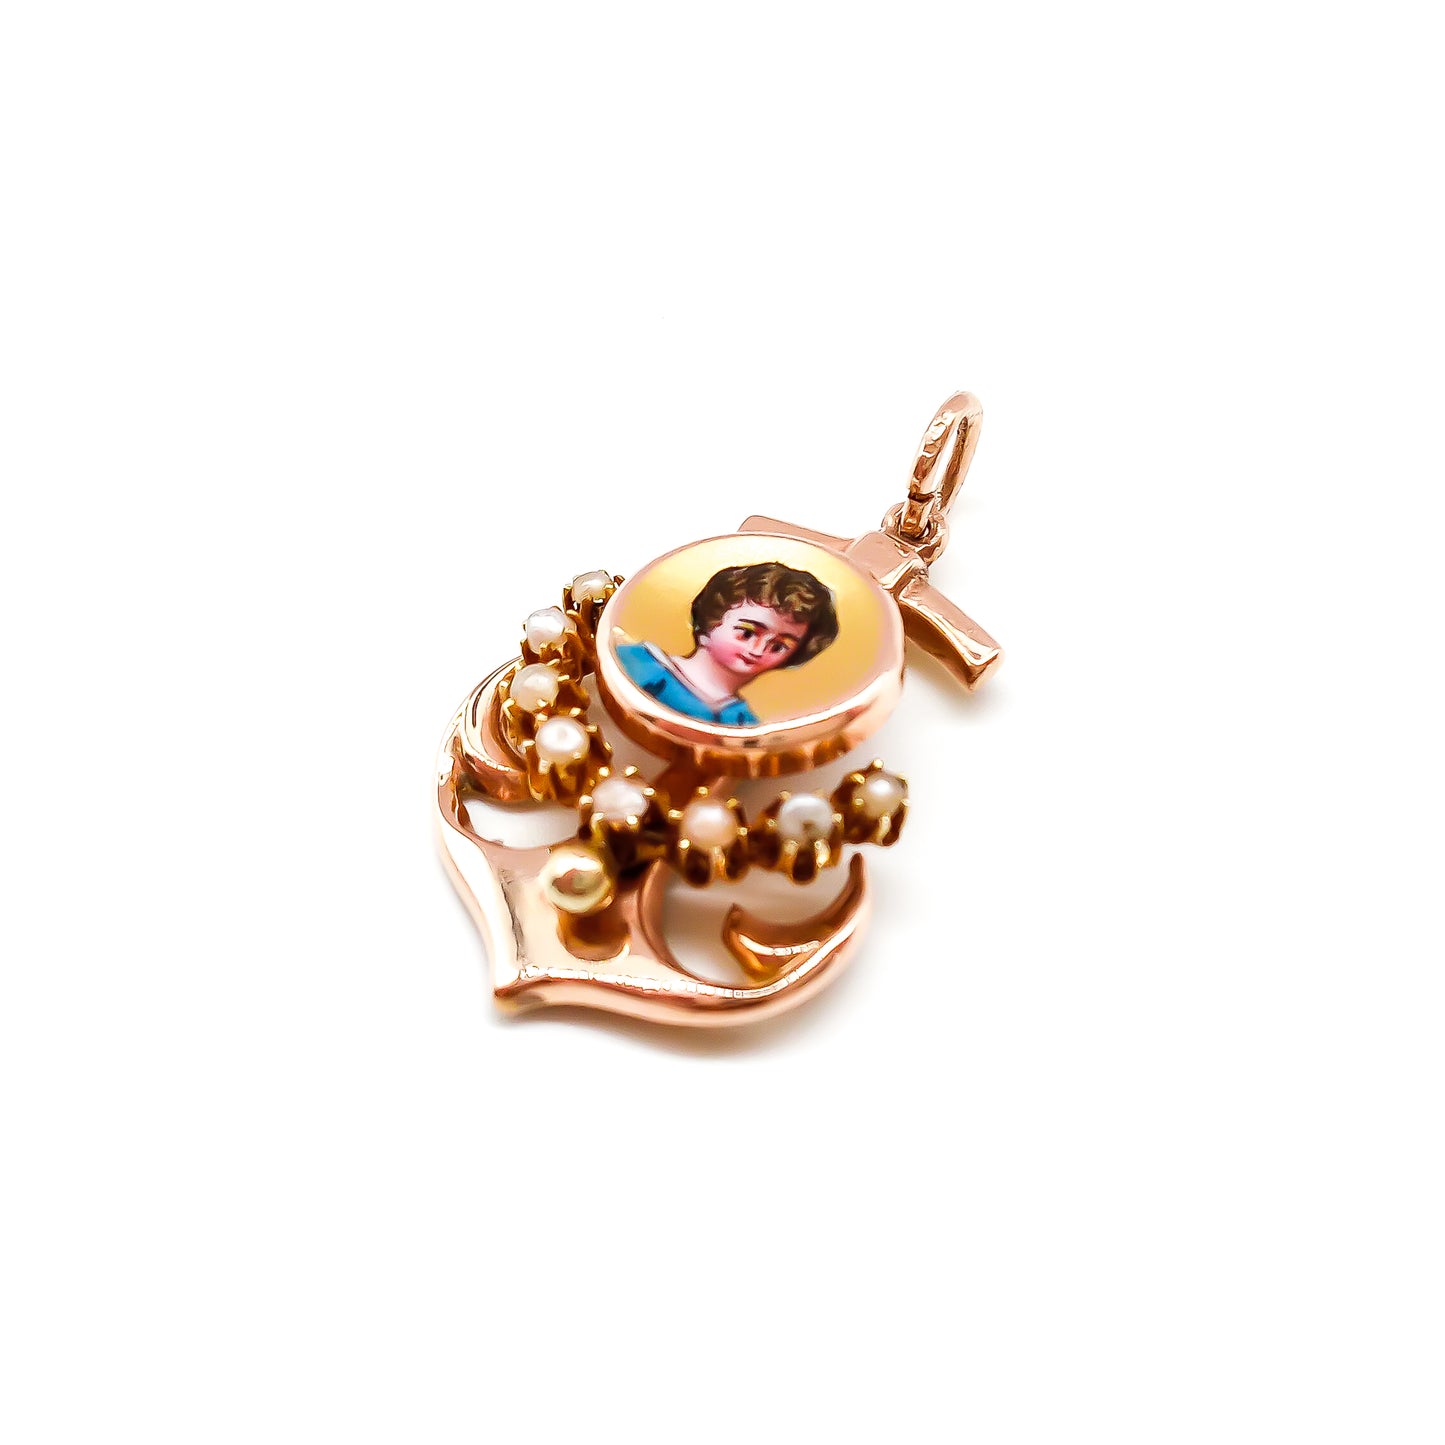 Pretty little 18ct rose gold anchor pendant with a hand-painted miniature portrait and seven seed pearls. Circa 1900